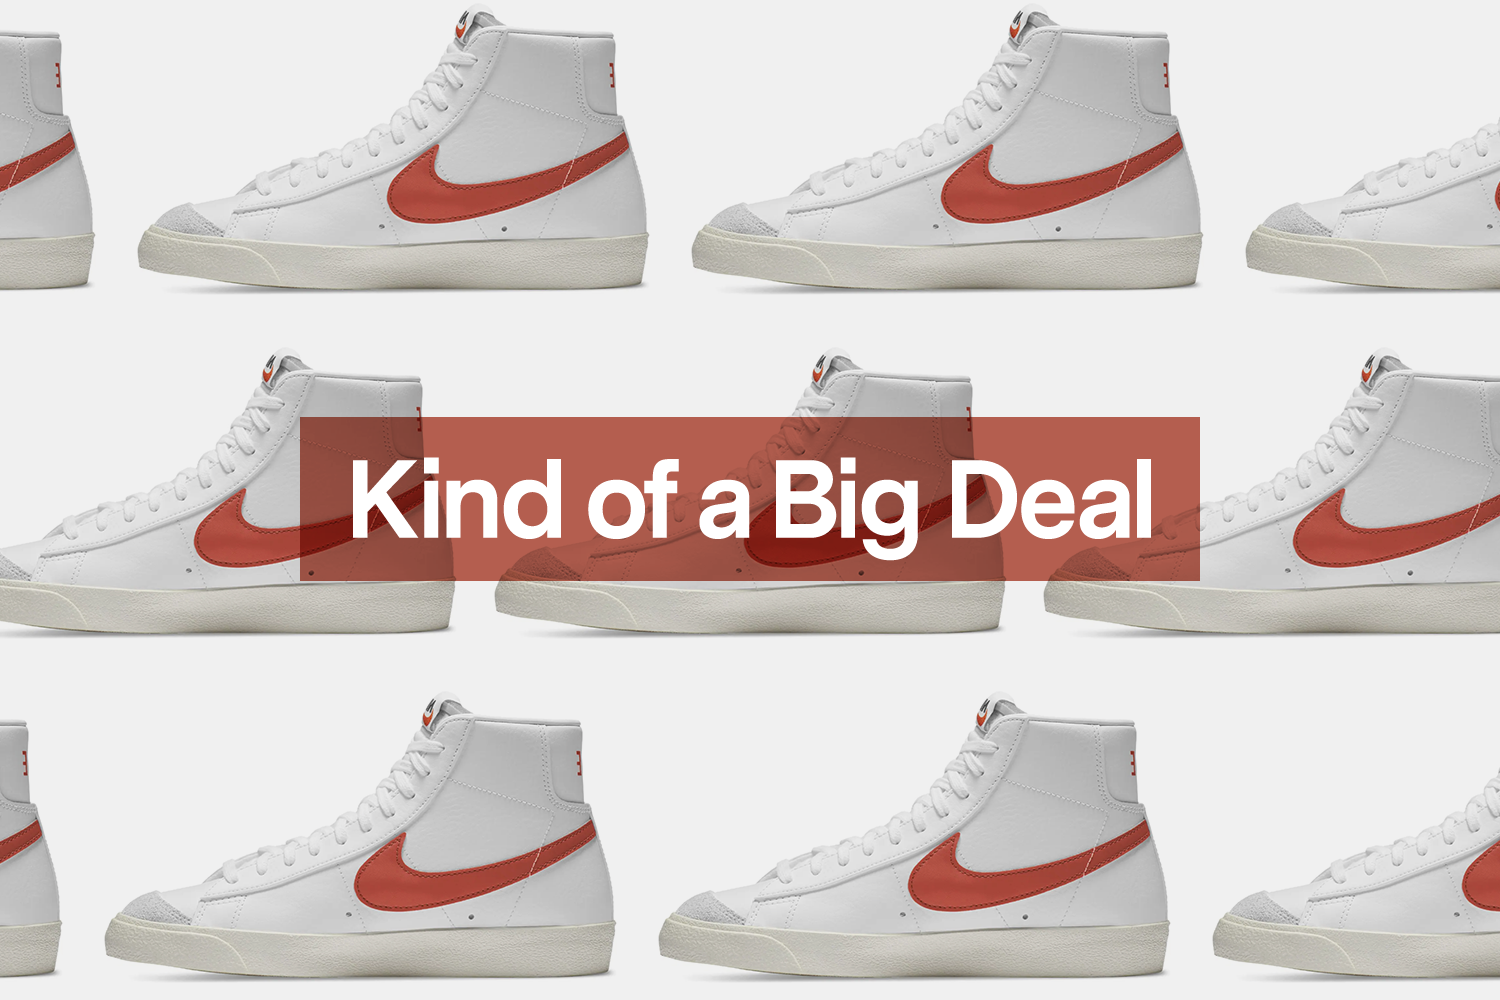 Save 25% on These Blazer Mid '77 Vintage Sneakers Today - InsideHook